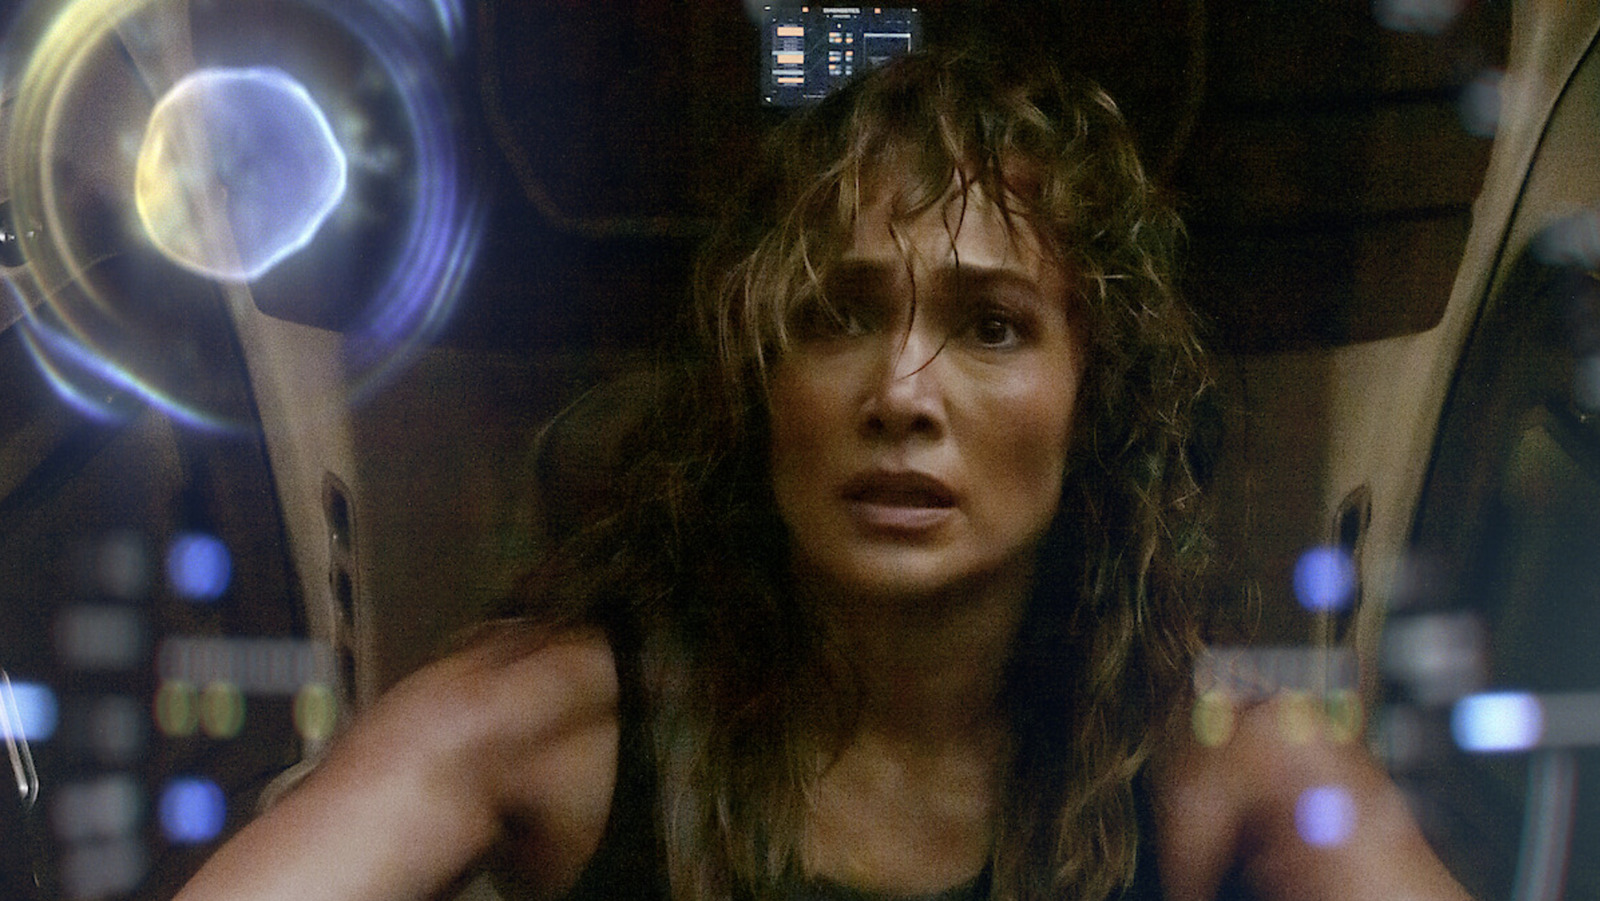 Jennifer Lopez Is Tracking A Renegade Robot In The Trailer For New Netflix Movie, Atlas